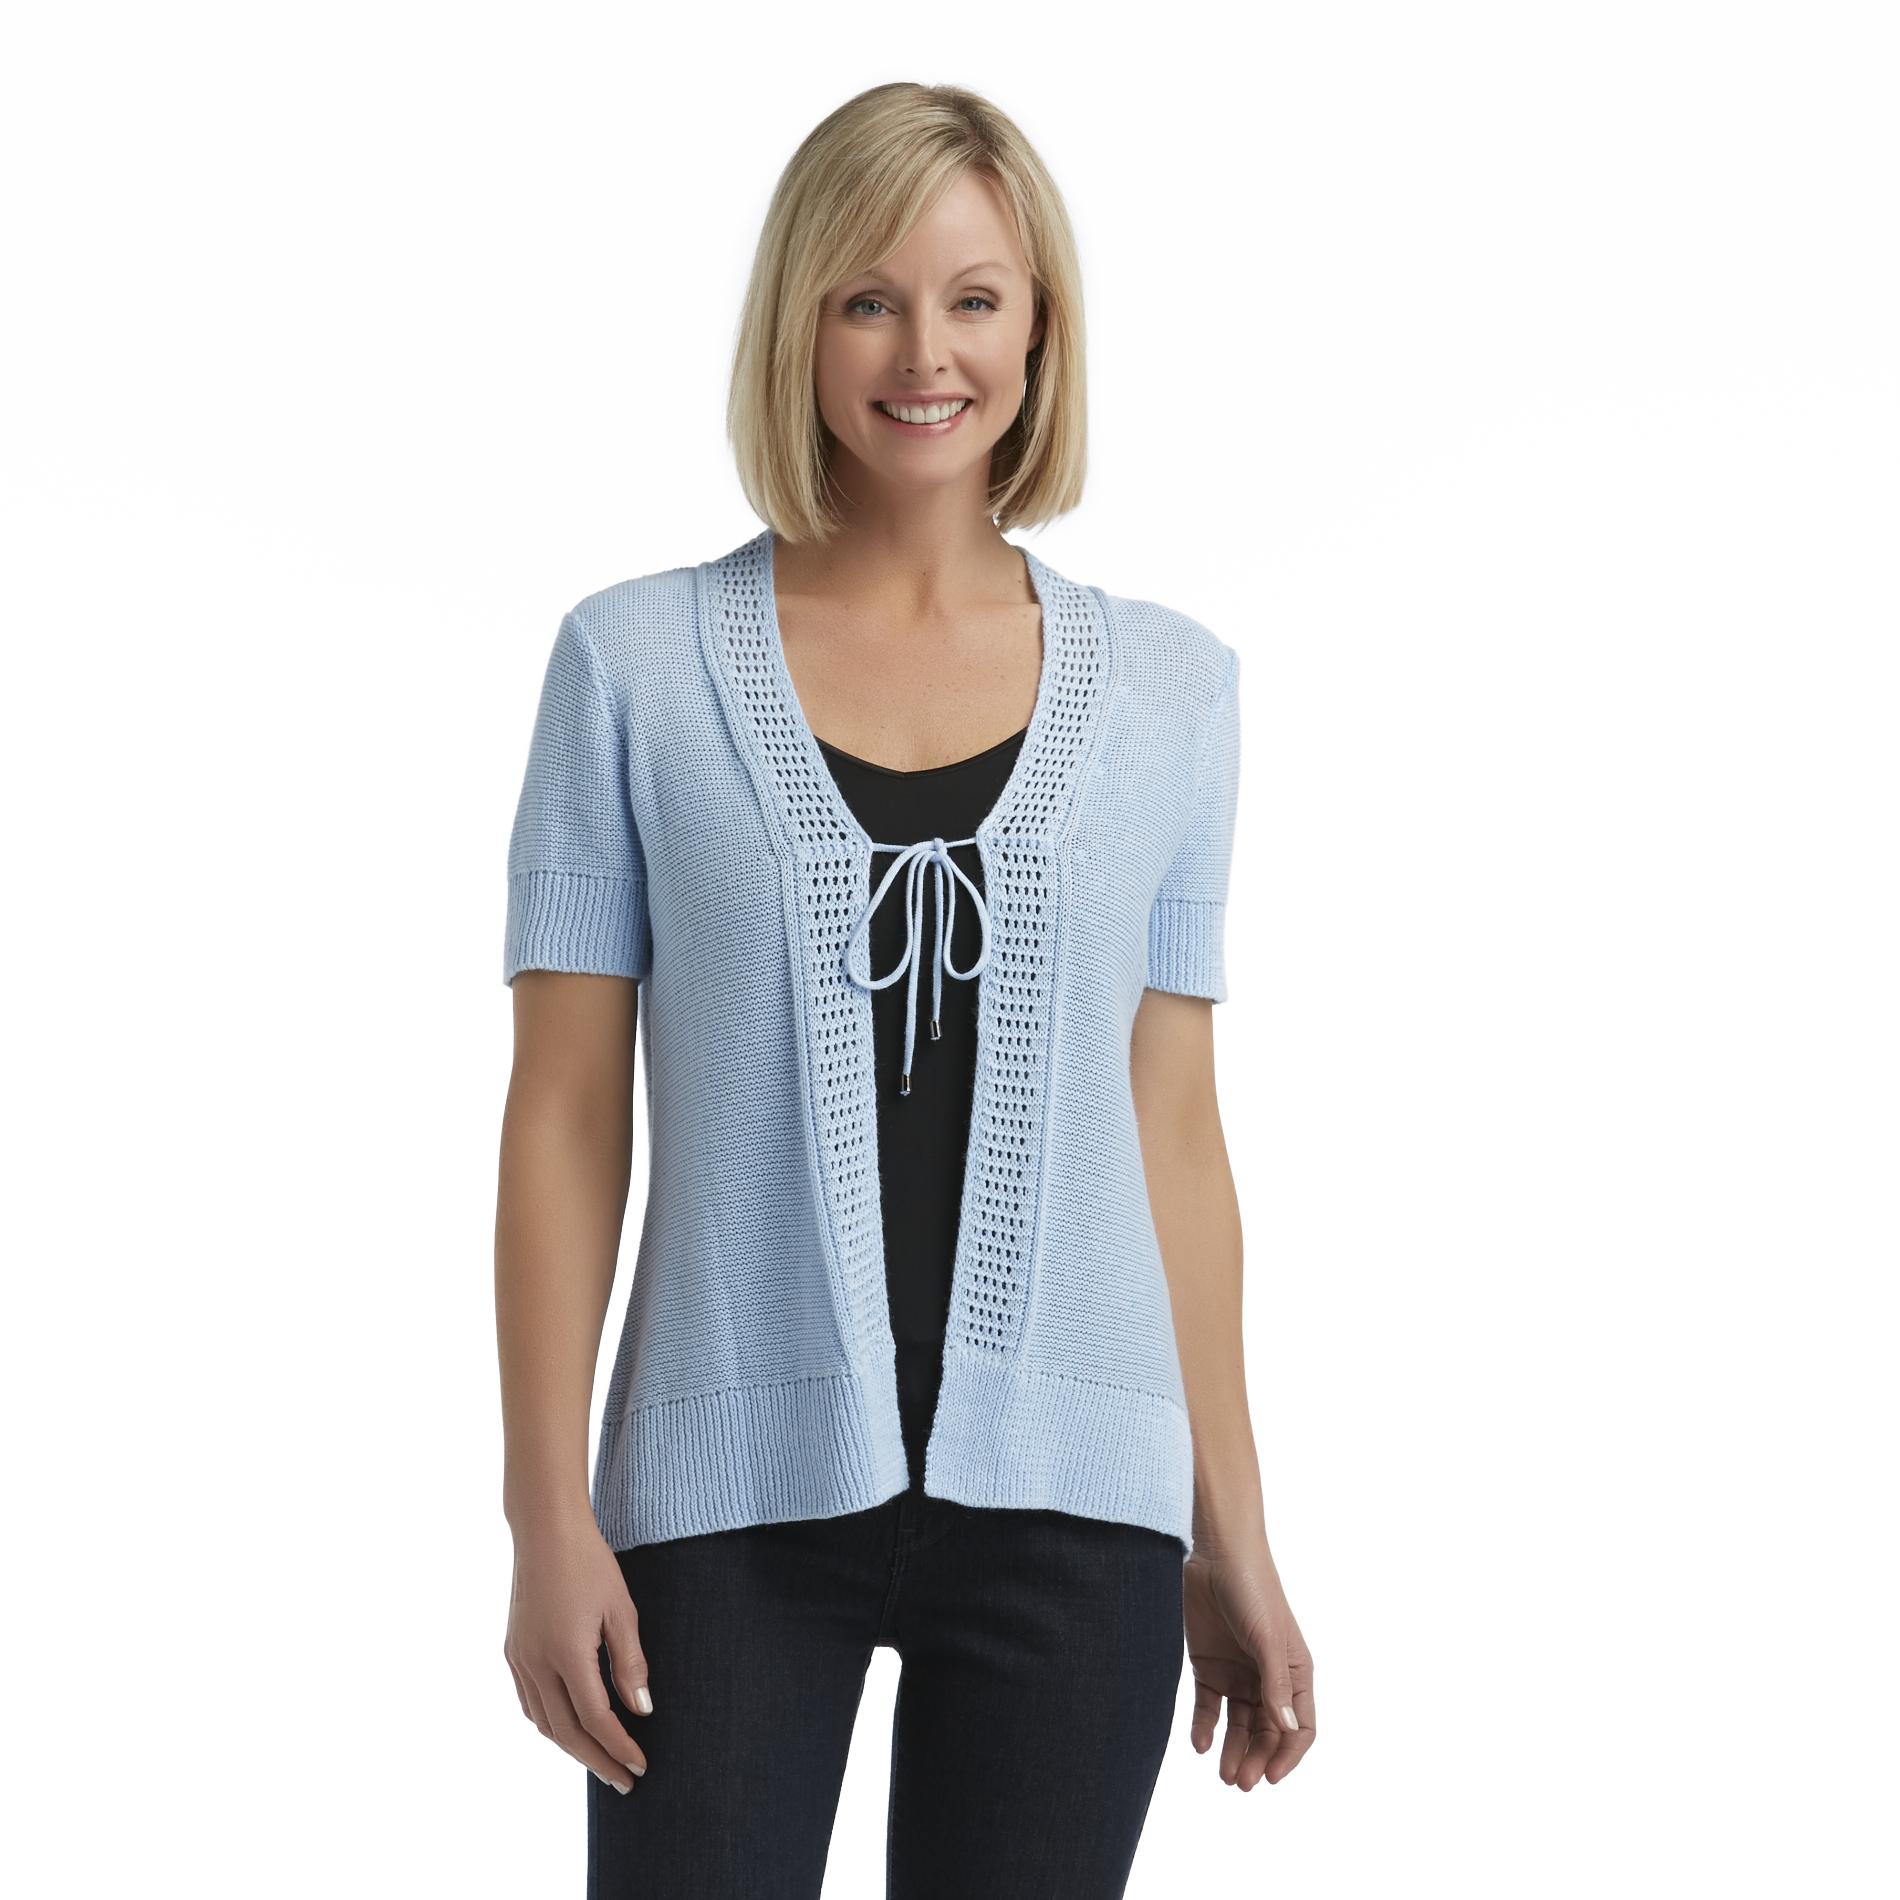 Basic Editions Women's Short-Sleeve Tie-Front Cardigan